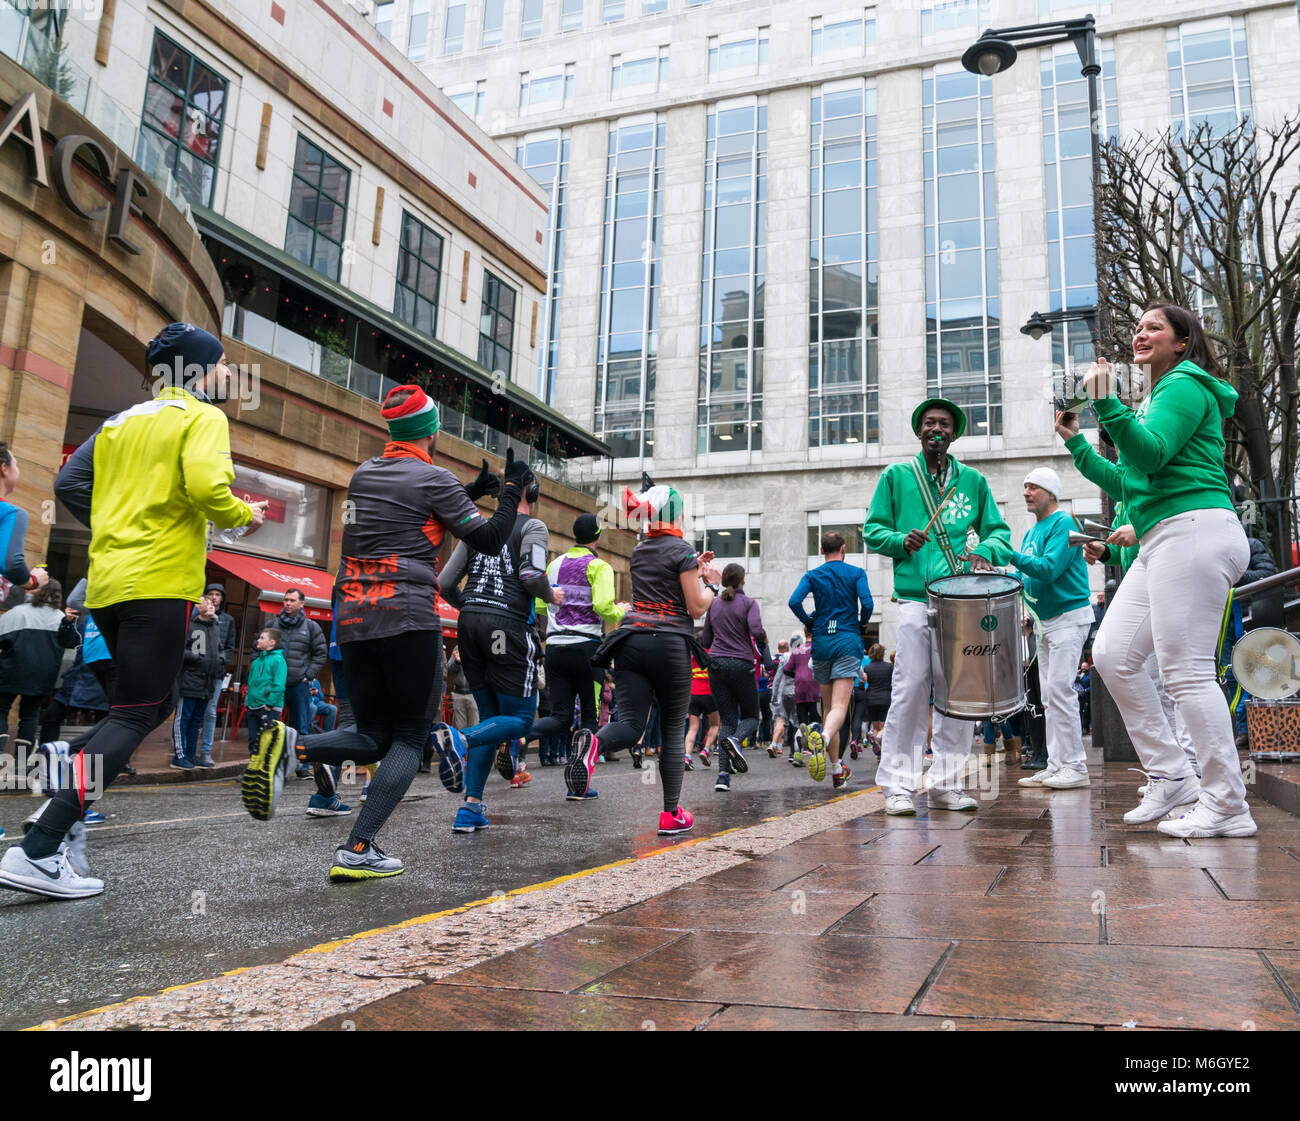 4 March 2018 - London, England. Runners showing thumbs up and enjoying cheering from the crowd. Local band Samba entertains the crowd. Credit: AndKa/Alamy Live News Stock Photo